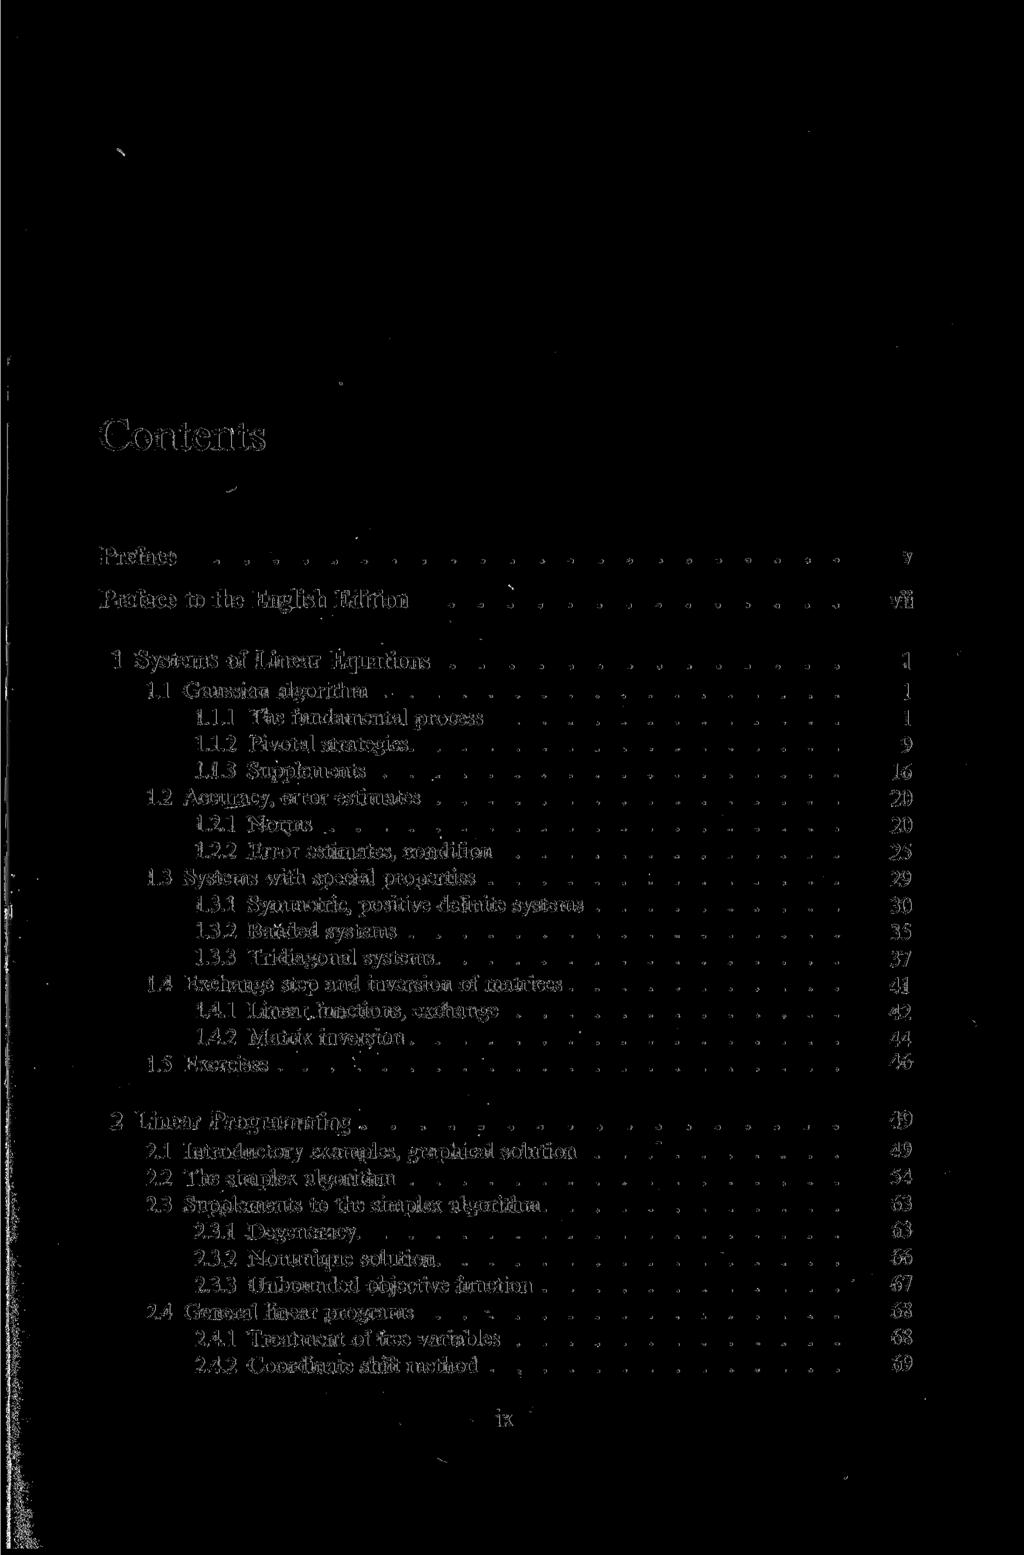 ", Contents Preface Preface to the English Edition v vii 1 Systems of Linear Equations 1 1.1 Gaussian algorithm 1 1.1.1 The fundamental process 1 1.1.2 Pivotal strategies 9 1.1.3 Supplements 16 1.